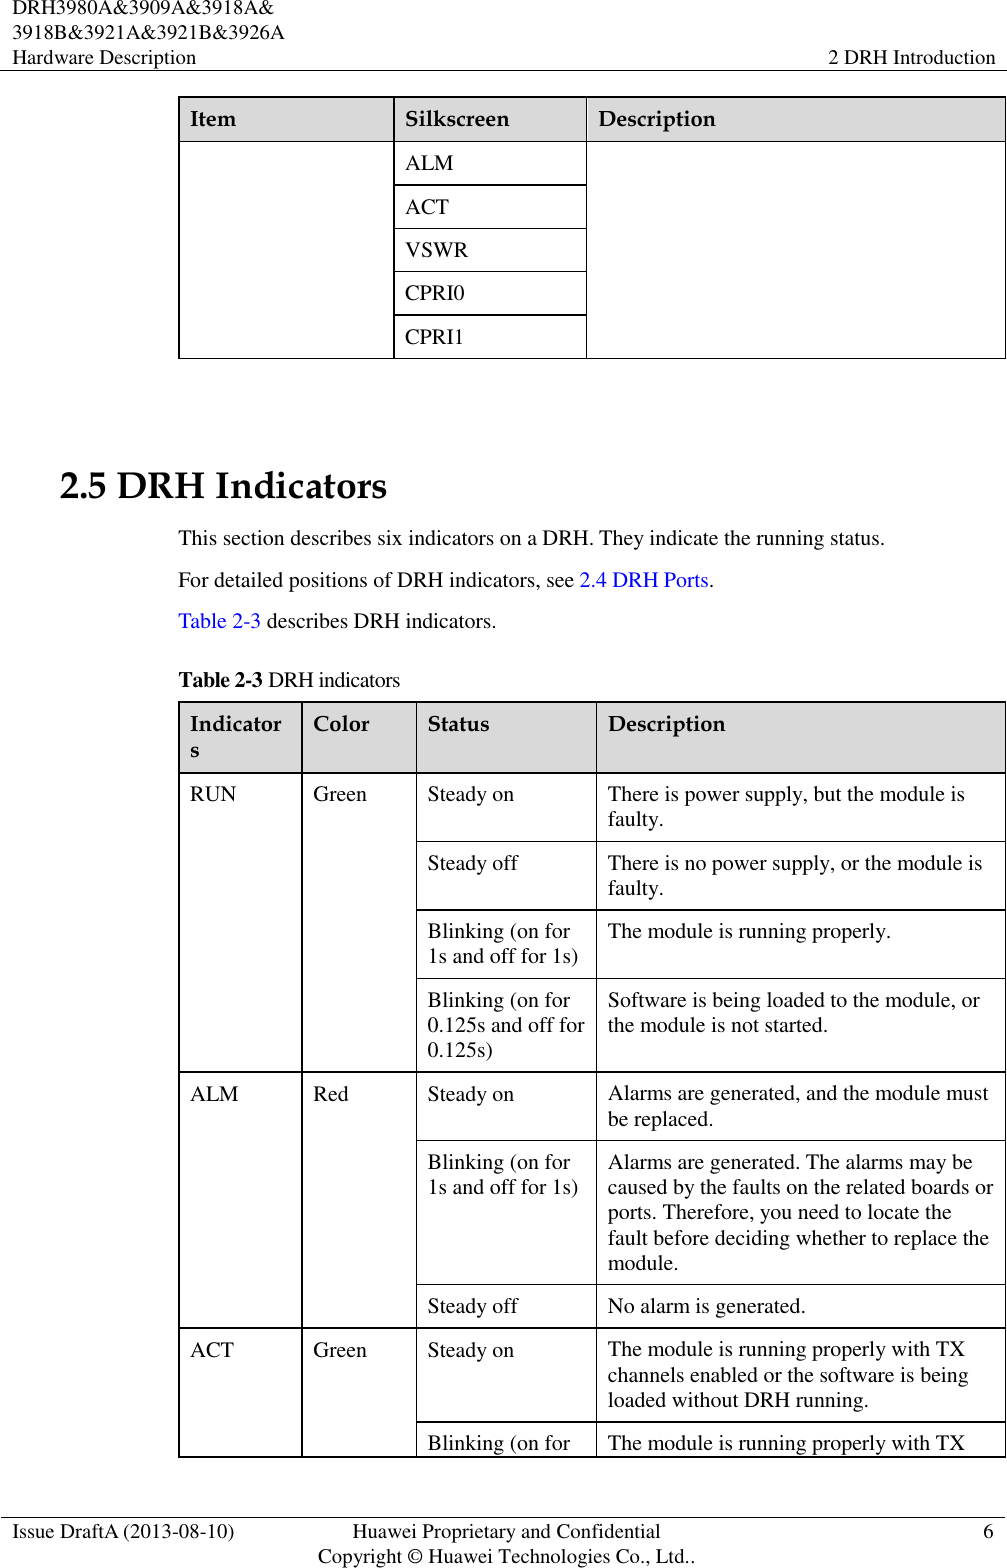  DRH3980A&amp;3909A&amp;3918A&amp; 3918B&amp;3921A&amp;3921B&amp;3926A Hardware Description   2 DRH Introduction  Issue DraftA (2013-08-10) Huawei Proprietary and Confidential                                     Copyright © Huawei Technologies Co., Ltd.. 6    Item Silkscreen Description ALM ACT VSWR CPRI0 CPRI1  2.5 DRH Indicators This section describes six indicators on a DRH. They indicate the running status.   For detailed positions of DRH indicators, see 2.4 DRH Ports. Table 2-3 describes DRH indicators. Table 2-3 DRH indicators Indicators Color Status Description RUN Green Steady on There is power supply, but the module is faulty. Steady off There is no power supply, or the module is faulty. Blinking (on for 1s and off for 1s) The module is running properly. Blinking (on for 0.125s and off for 0.125s) Software is being loaded to the module, or the module is not started. ALM Red Steady on Alarms are generated, and the module must be replaced. Blinking (on for 1s and off for 1s) Alarms are generated. The alarms may be caused by the faults on the related boards or ports. Therefore, you need to locate the fault before deciding whether to replace the module. Steady off No alarm is generated. ACT Green Steady on The module is running properly with TX channels enabled or the software is being loaded without DRH running. Blinking (on for The module is running properly with TX 